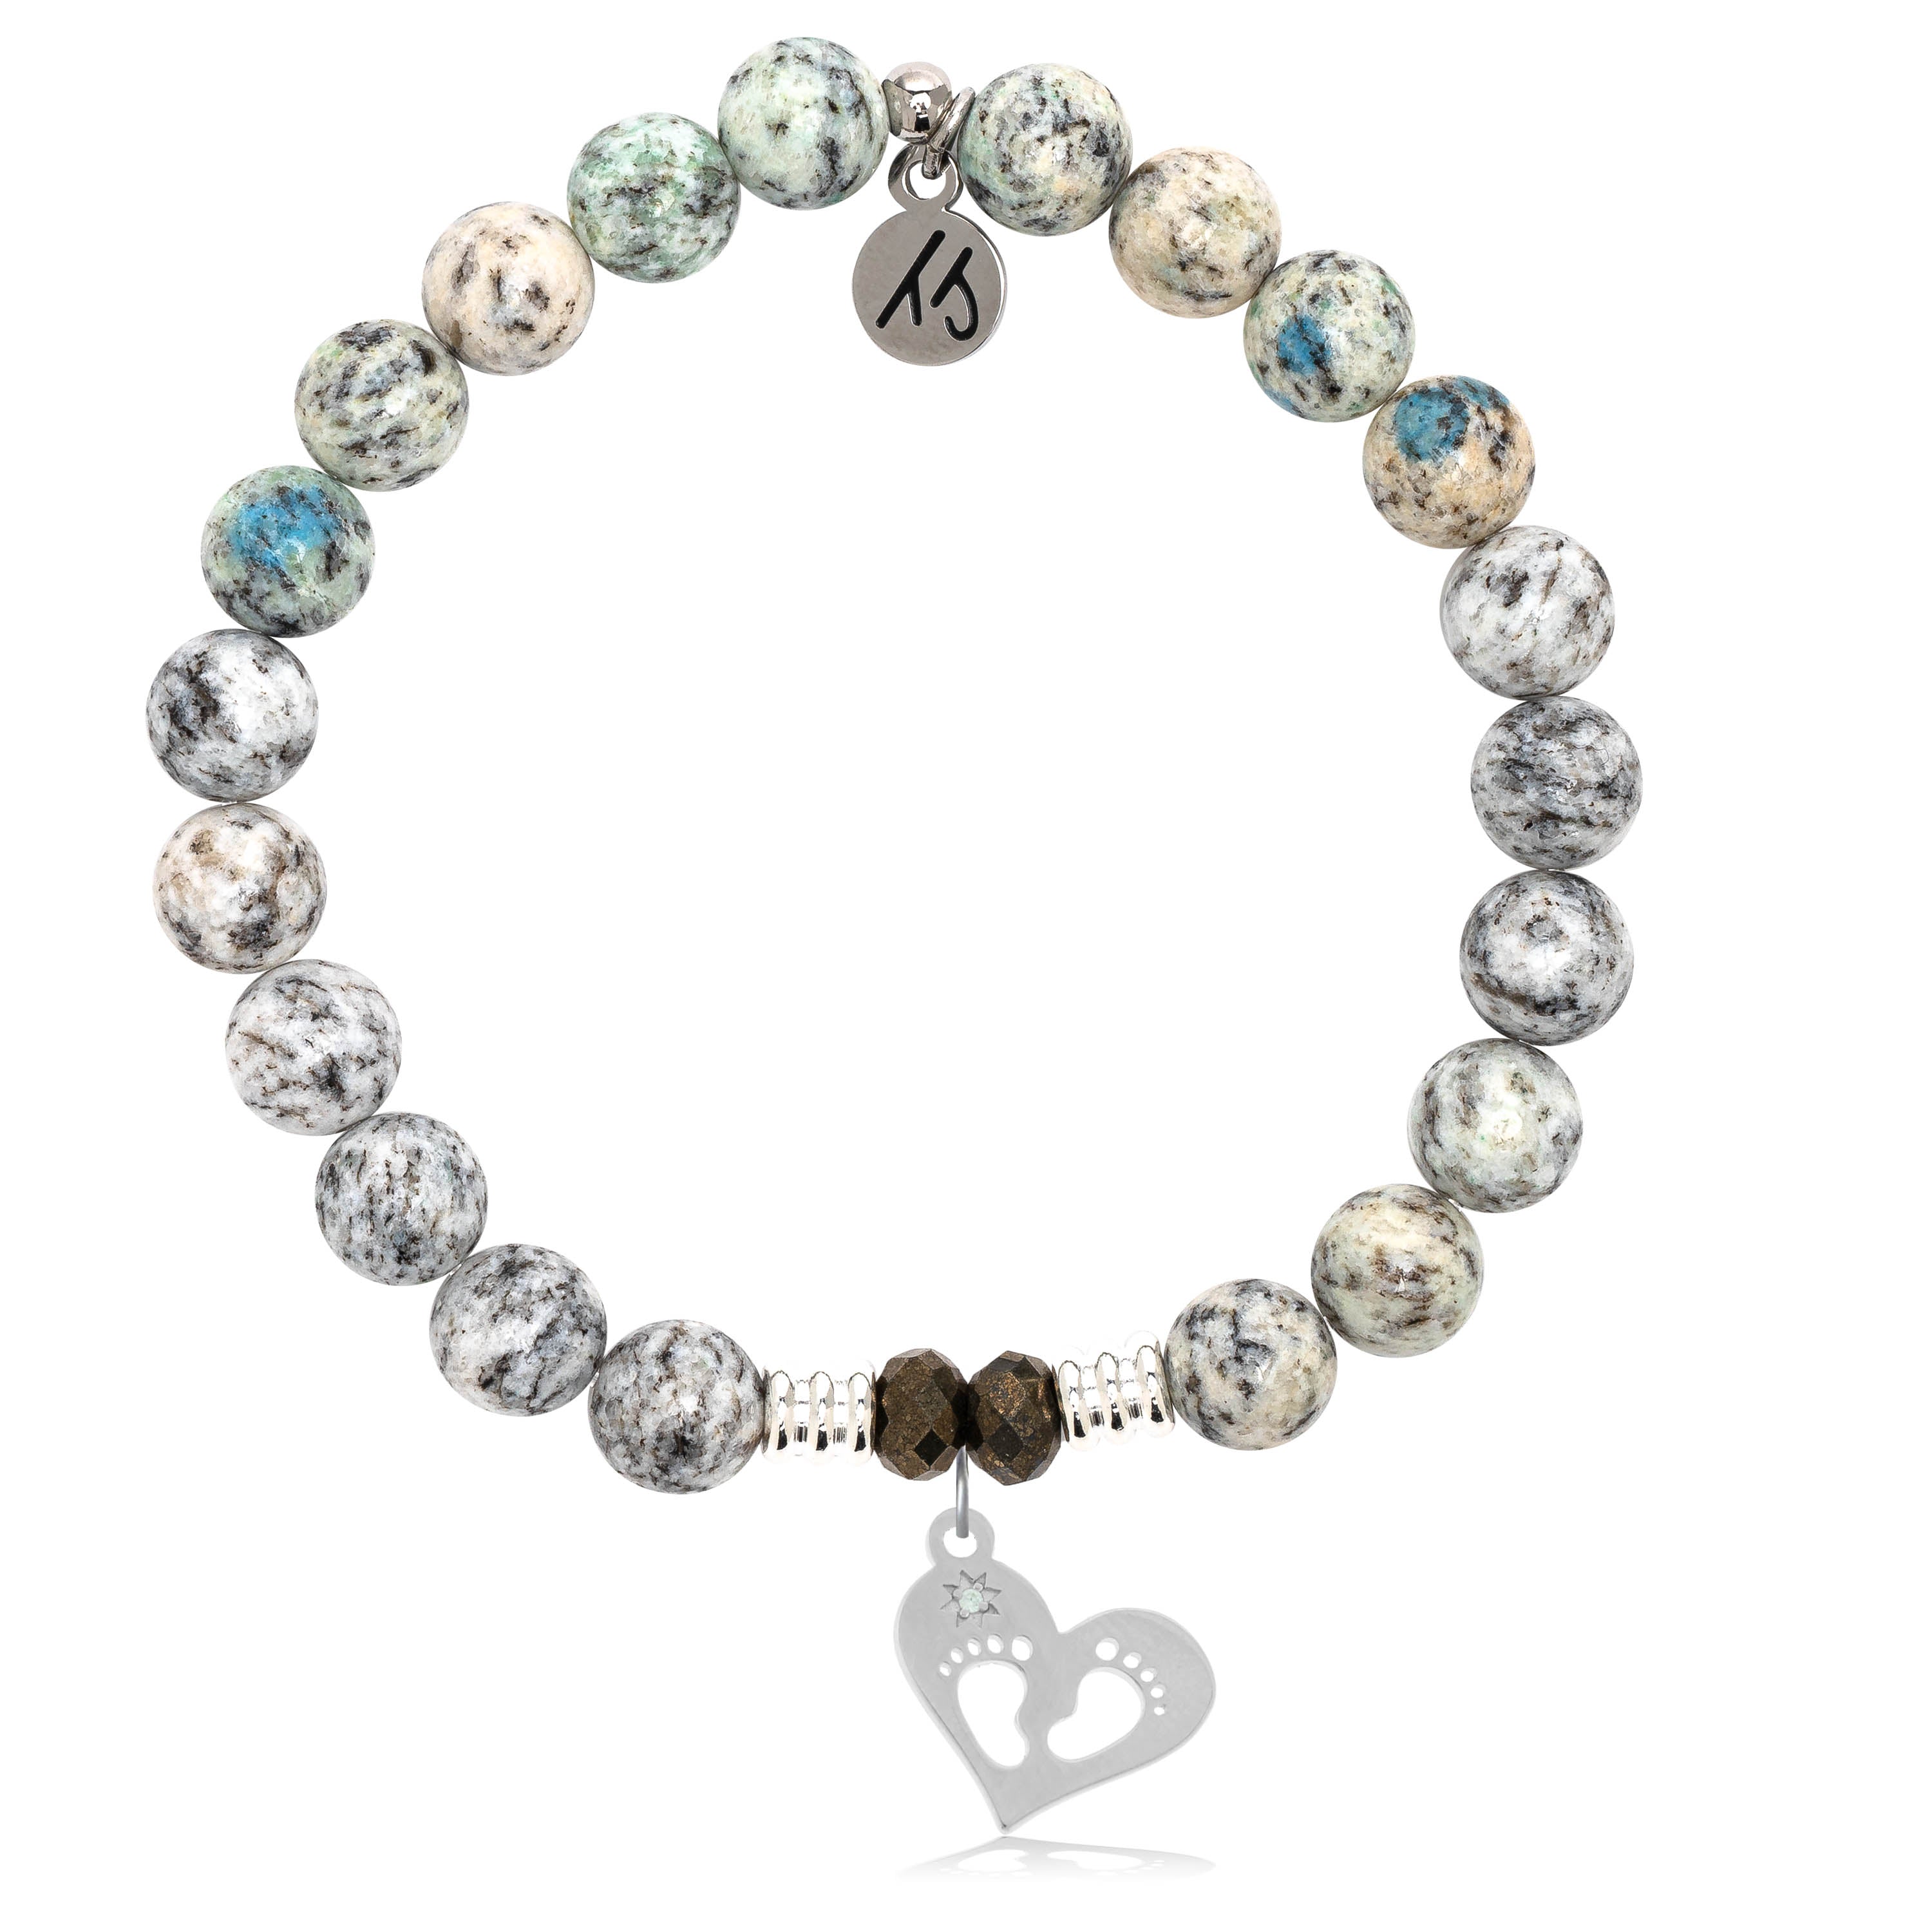 MaeMae Jewelry | Multi Color Swarovski Crystals | The 7 Chakras Anklet